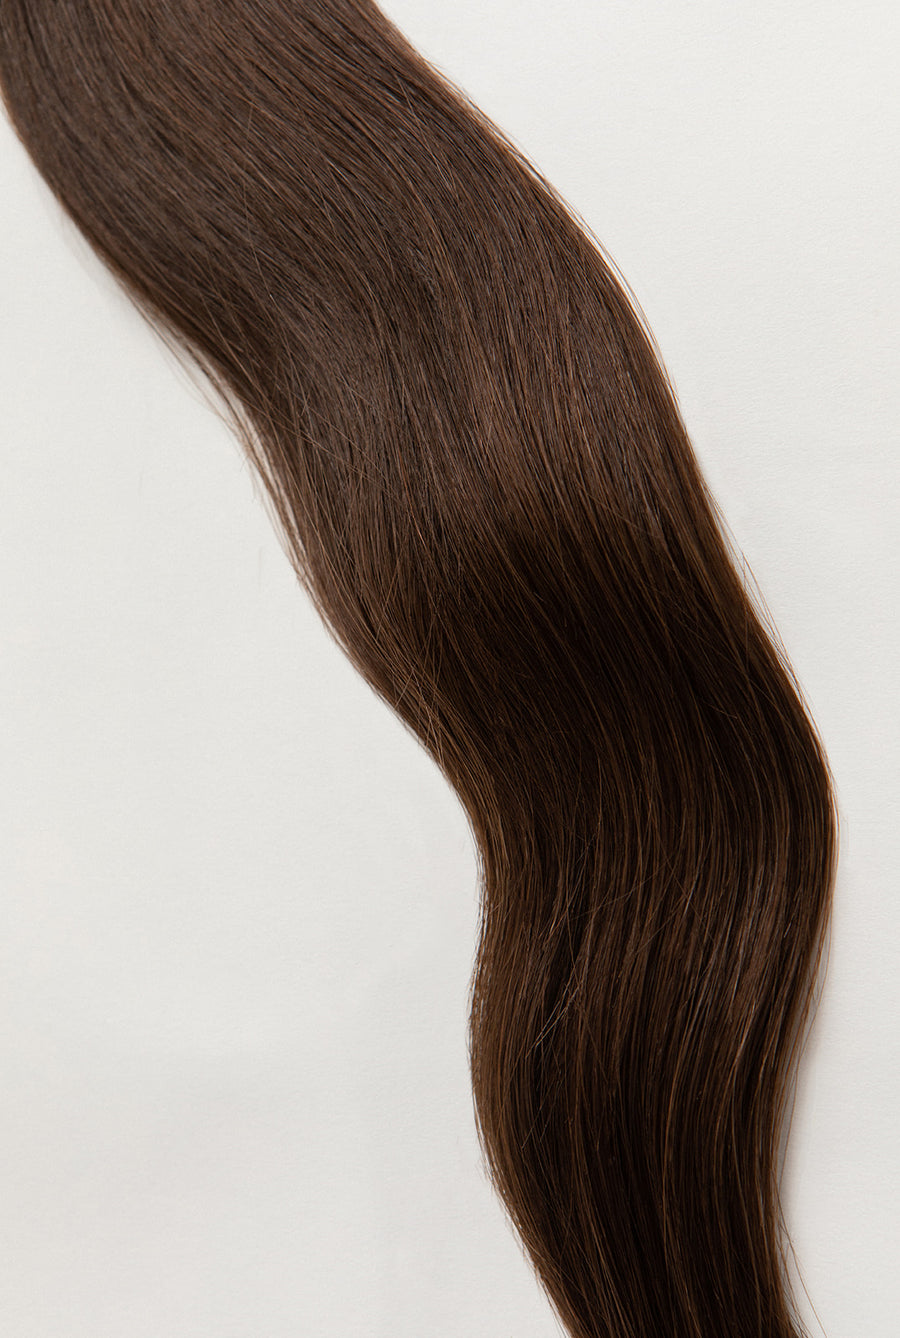 Sage is our medium brown, with golden undertones. Stylist lingo: Natural level 6 Hidden Harloc Clip-In Extensions are made from ethically sourced, Remy Slavic hair. They come with 5 seamless silicone wefts to ensure an undetectable result that is comfortable to wear. Whether you are looking to add volume or length, a stunning look for a special event, or just want to look and feel gorgeous. Available in 10 of our beautiful shades.